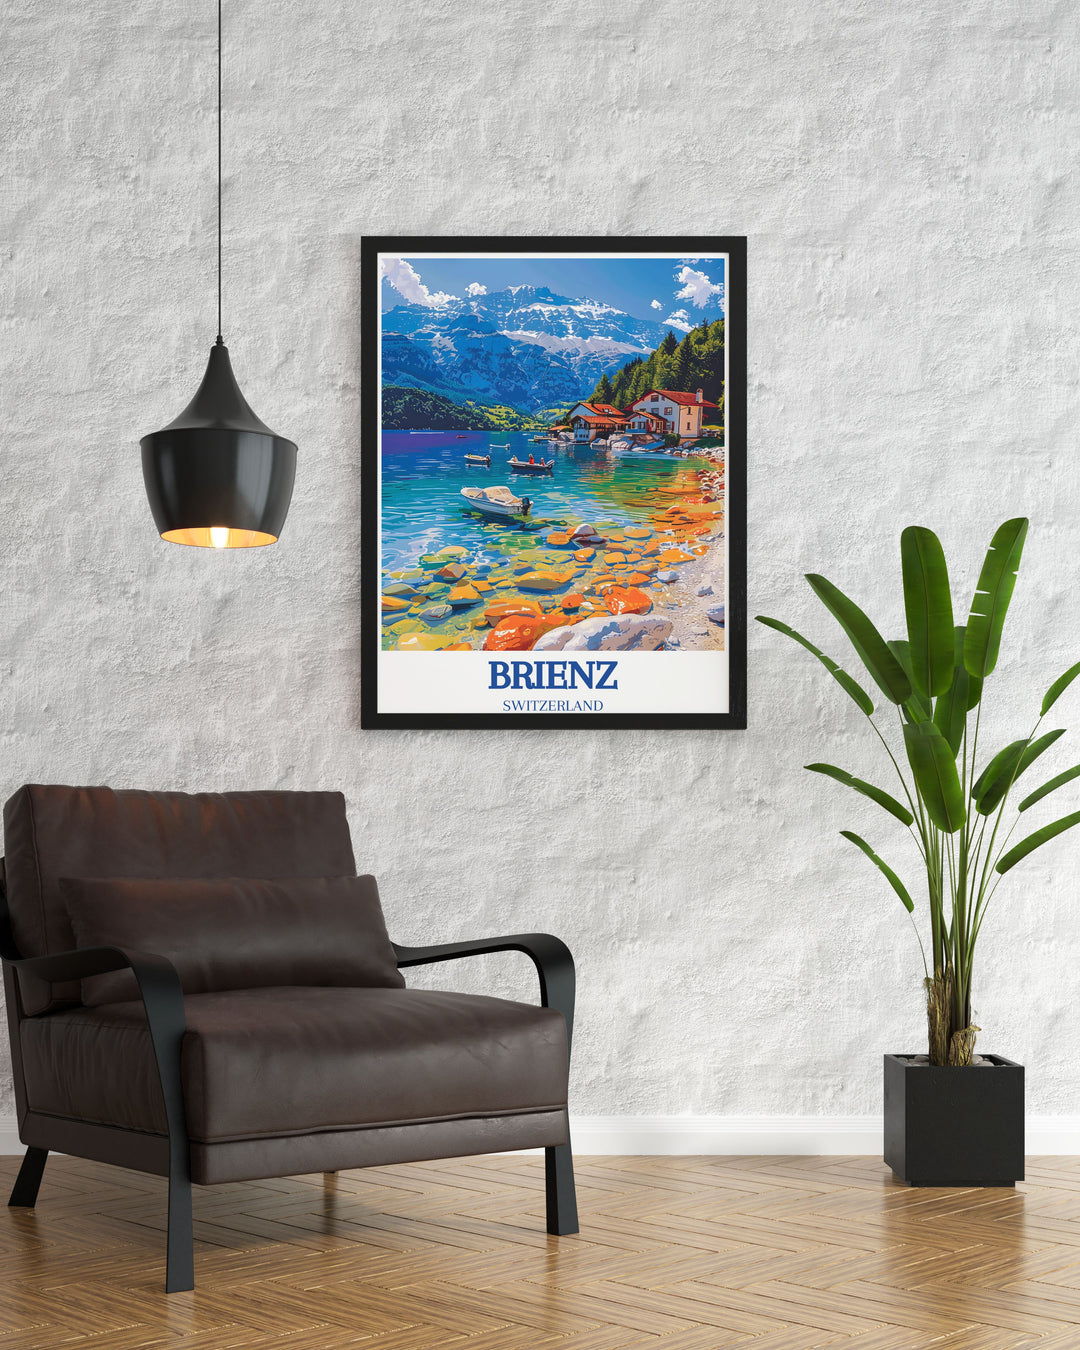 Brienz Switzerland travel poster featuring Lake Brienz and Brienzer Rothorn capturing the timeless charm of the Swiss Alps this beautiful artwork is perfect for adding a sense of adventure and tranquility to your living space